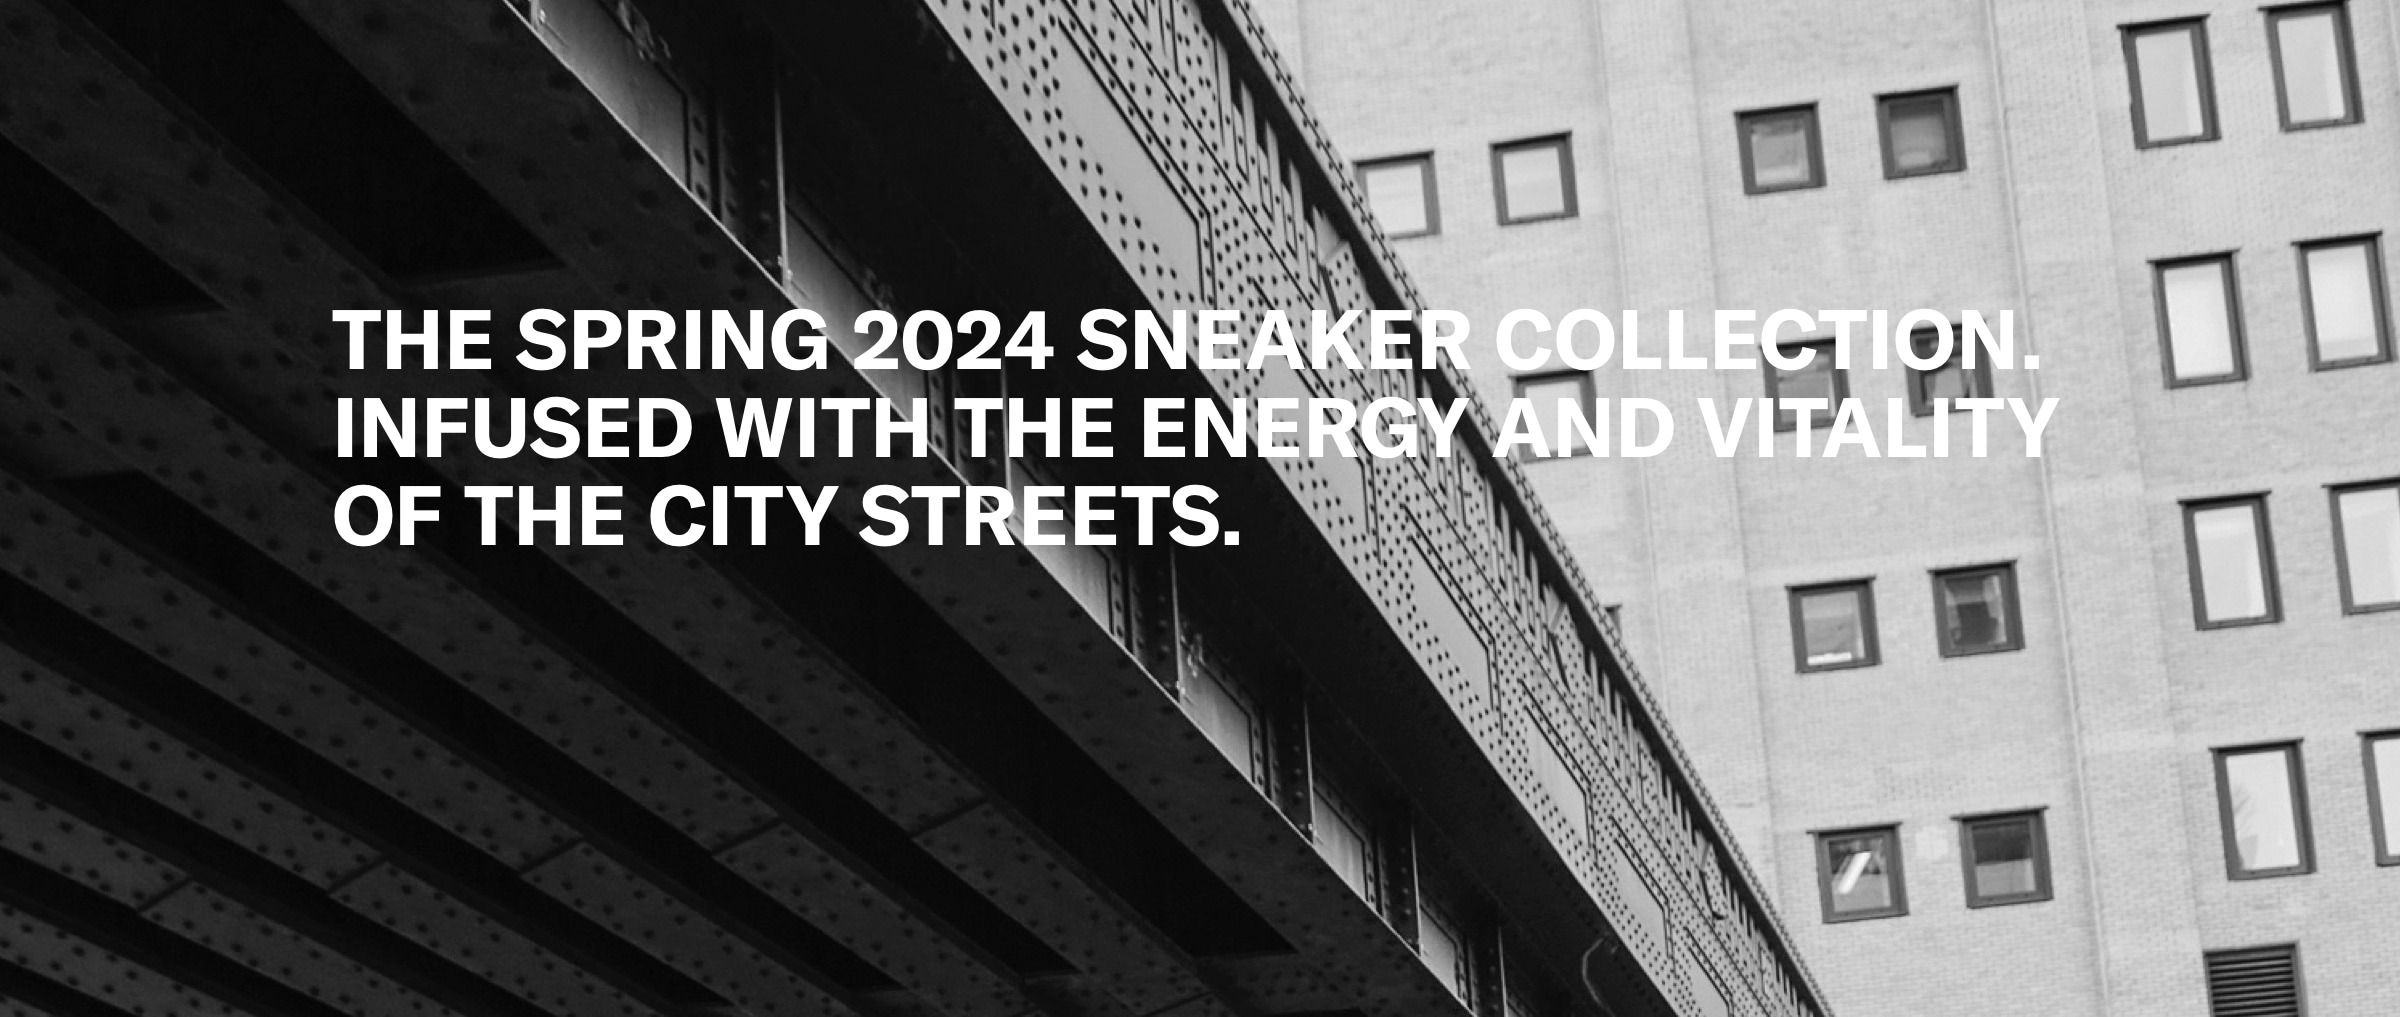 The Spring 2024 Sneaker Collection Infused with the Energy and Vitality of the City Streets